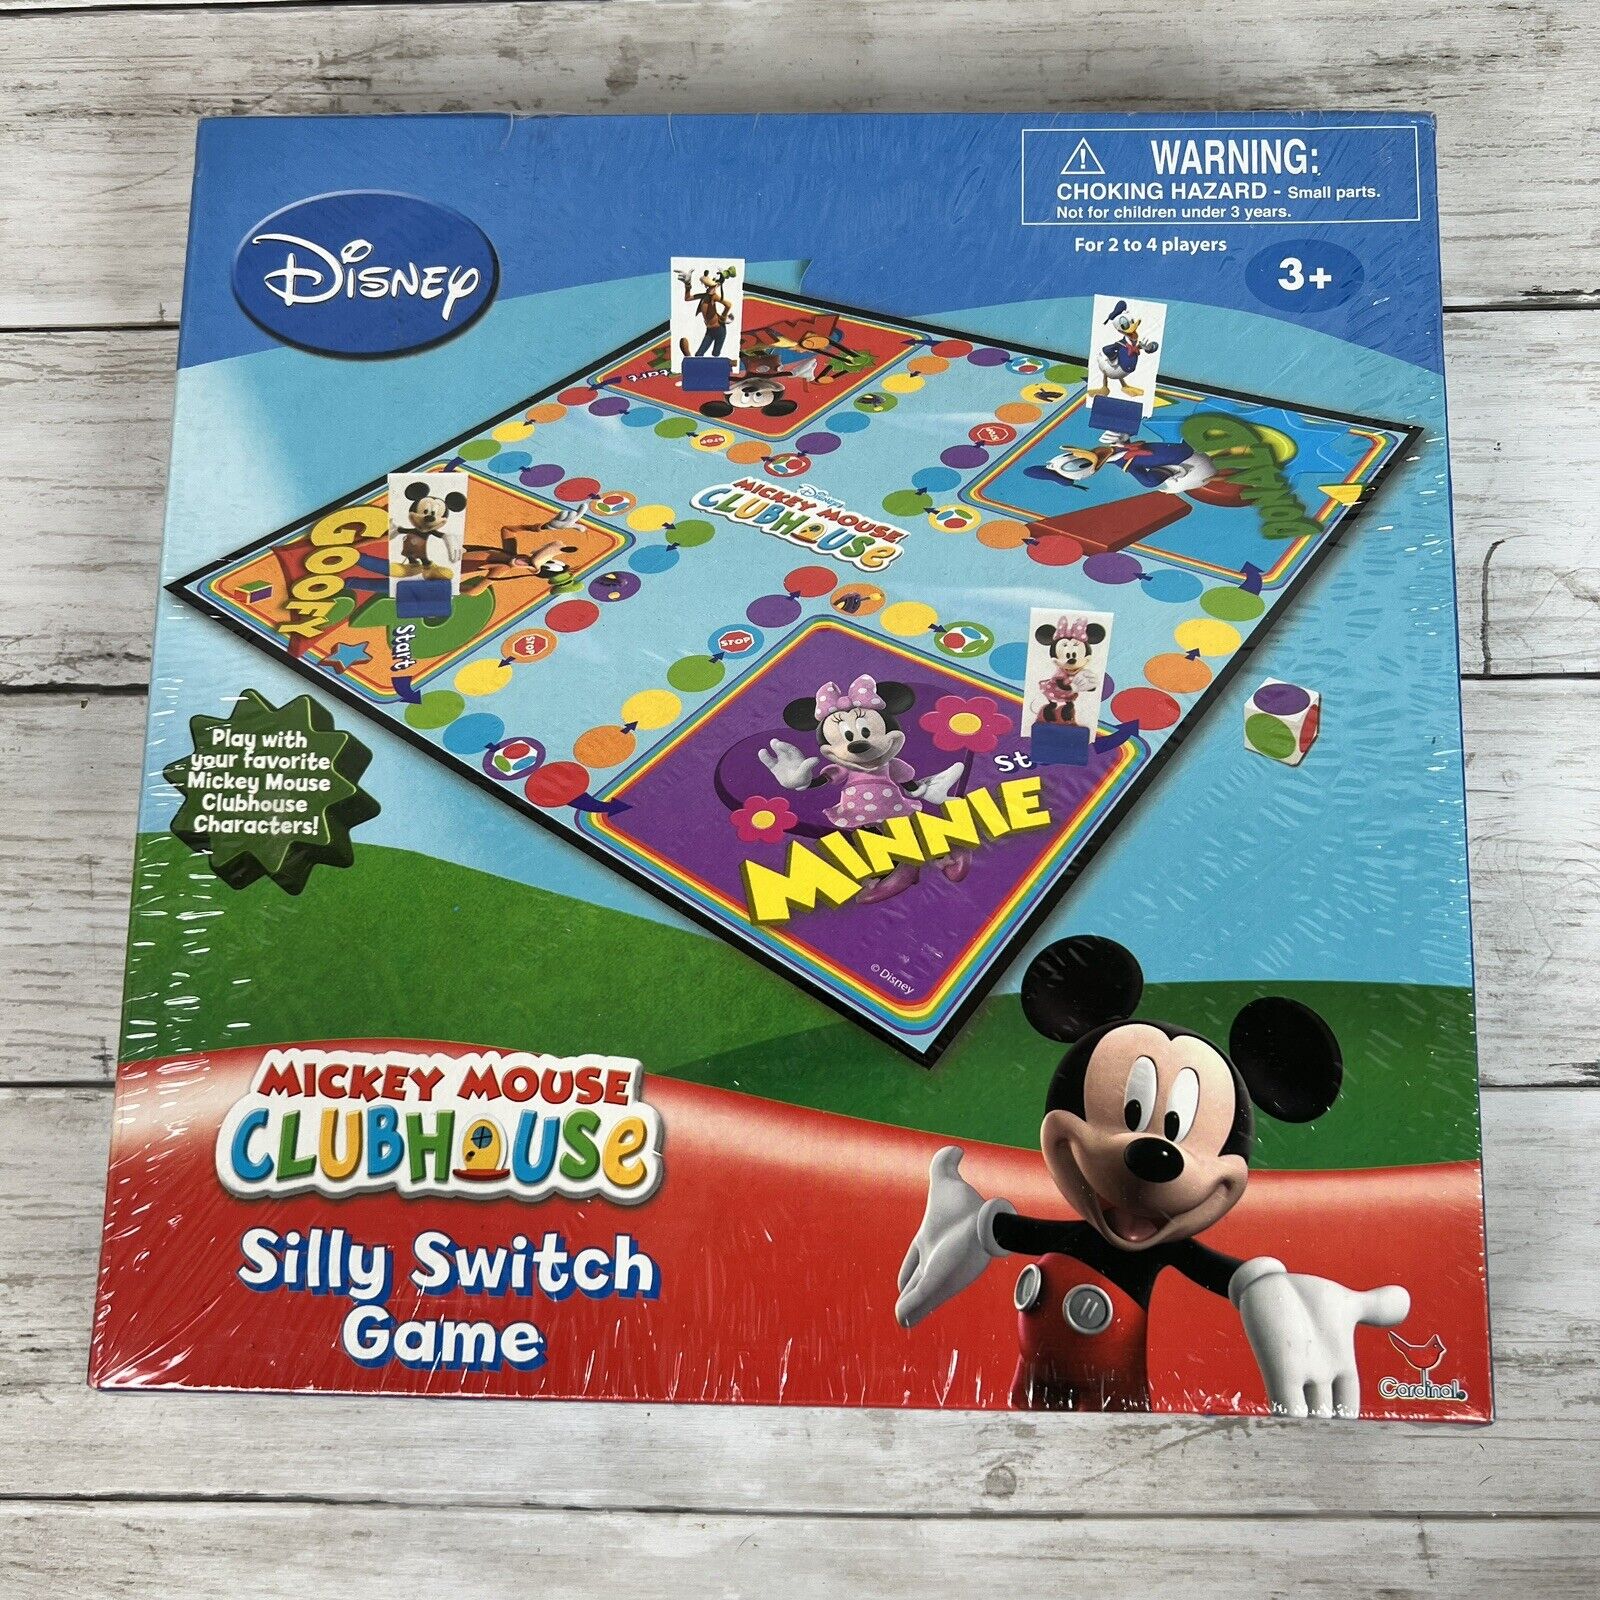 Disney Playhouse Board Game Mickey Mouse Clubhouse SILLY SWITCH GAME Sealed New